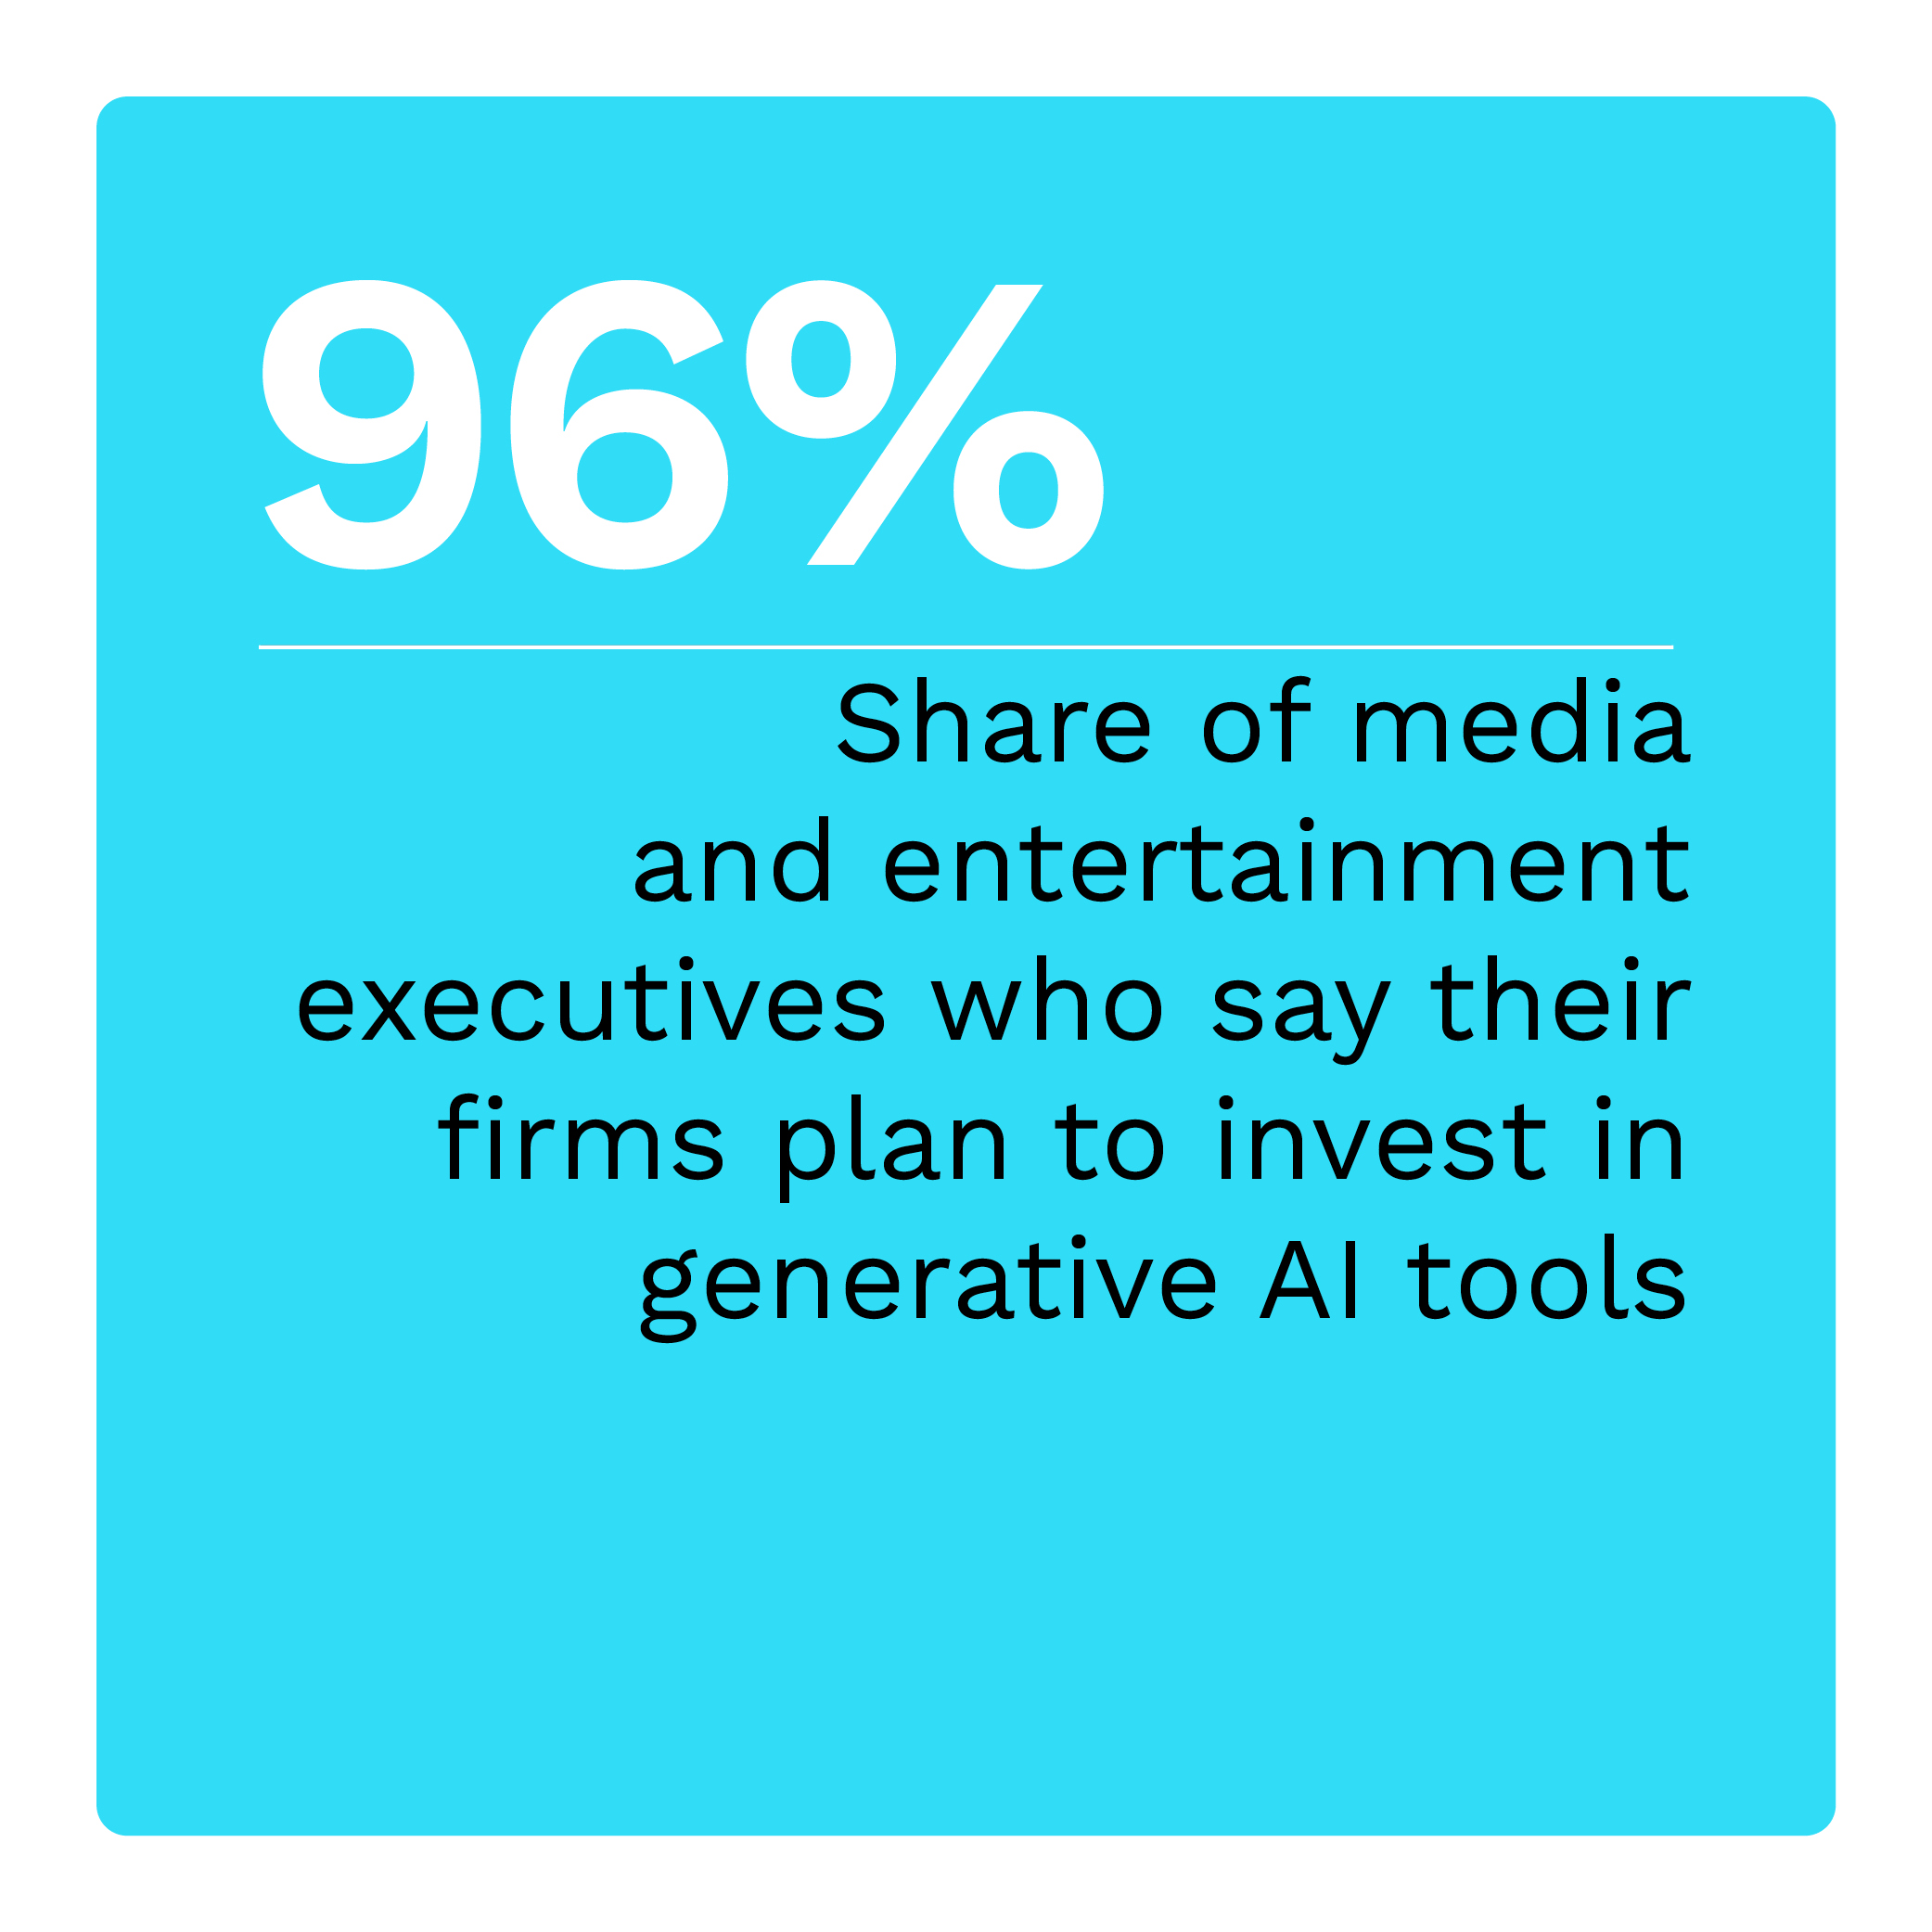 96%: Share of media and entertainment executives who say their firms plan to invest in generative AI tools